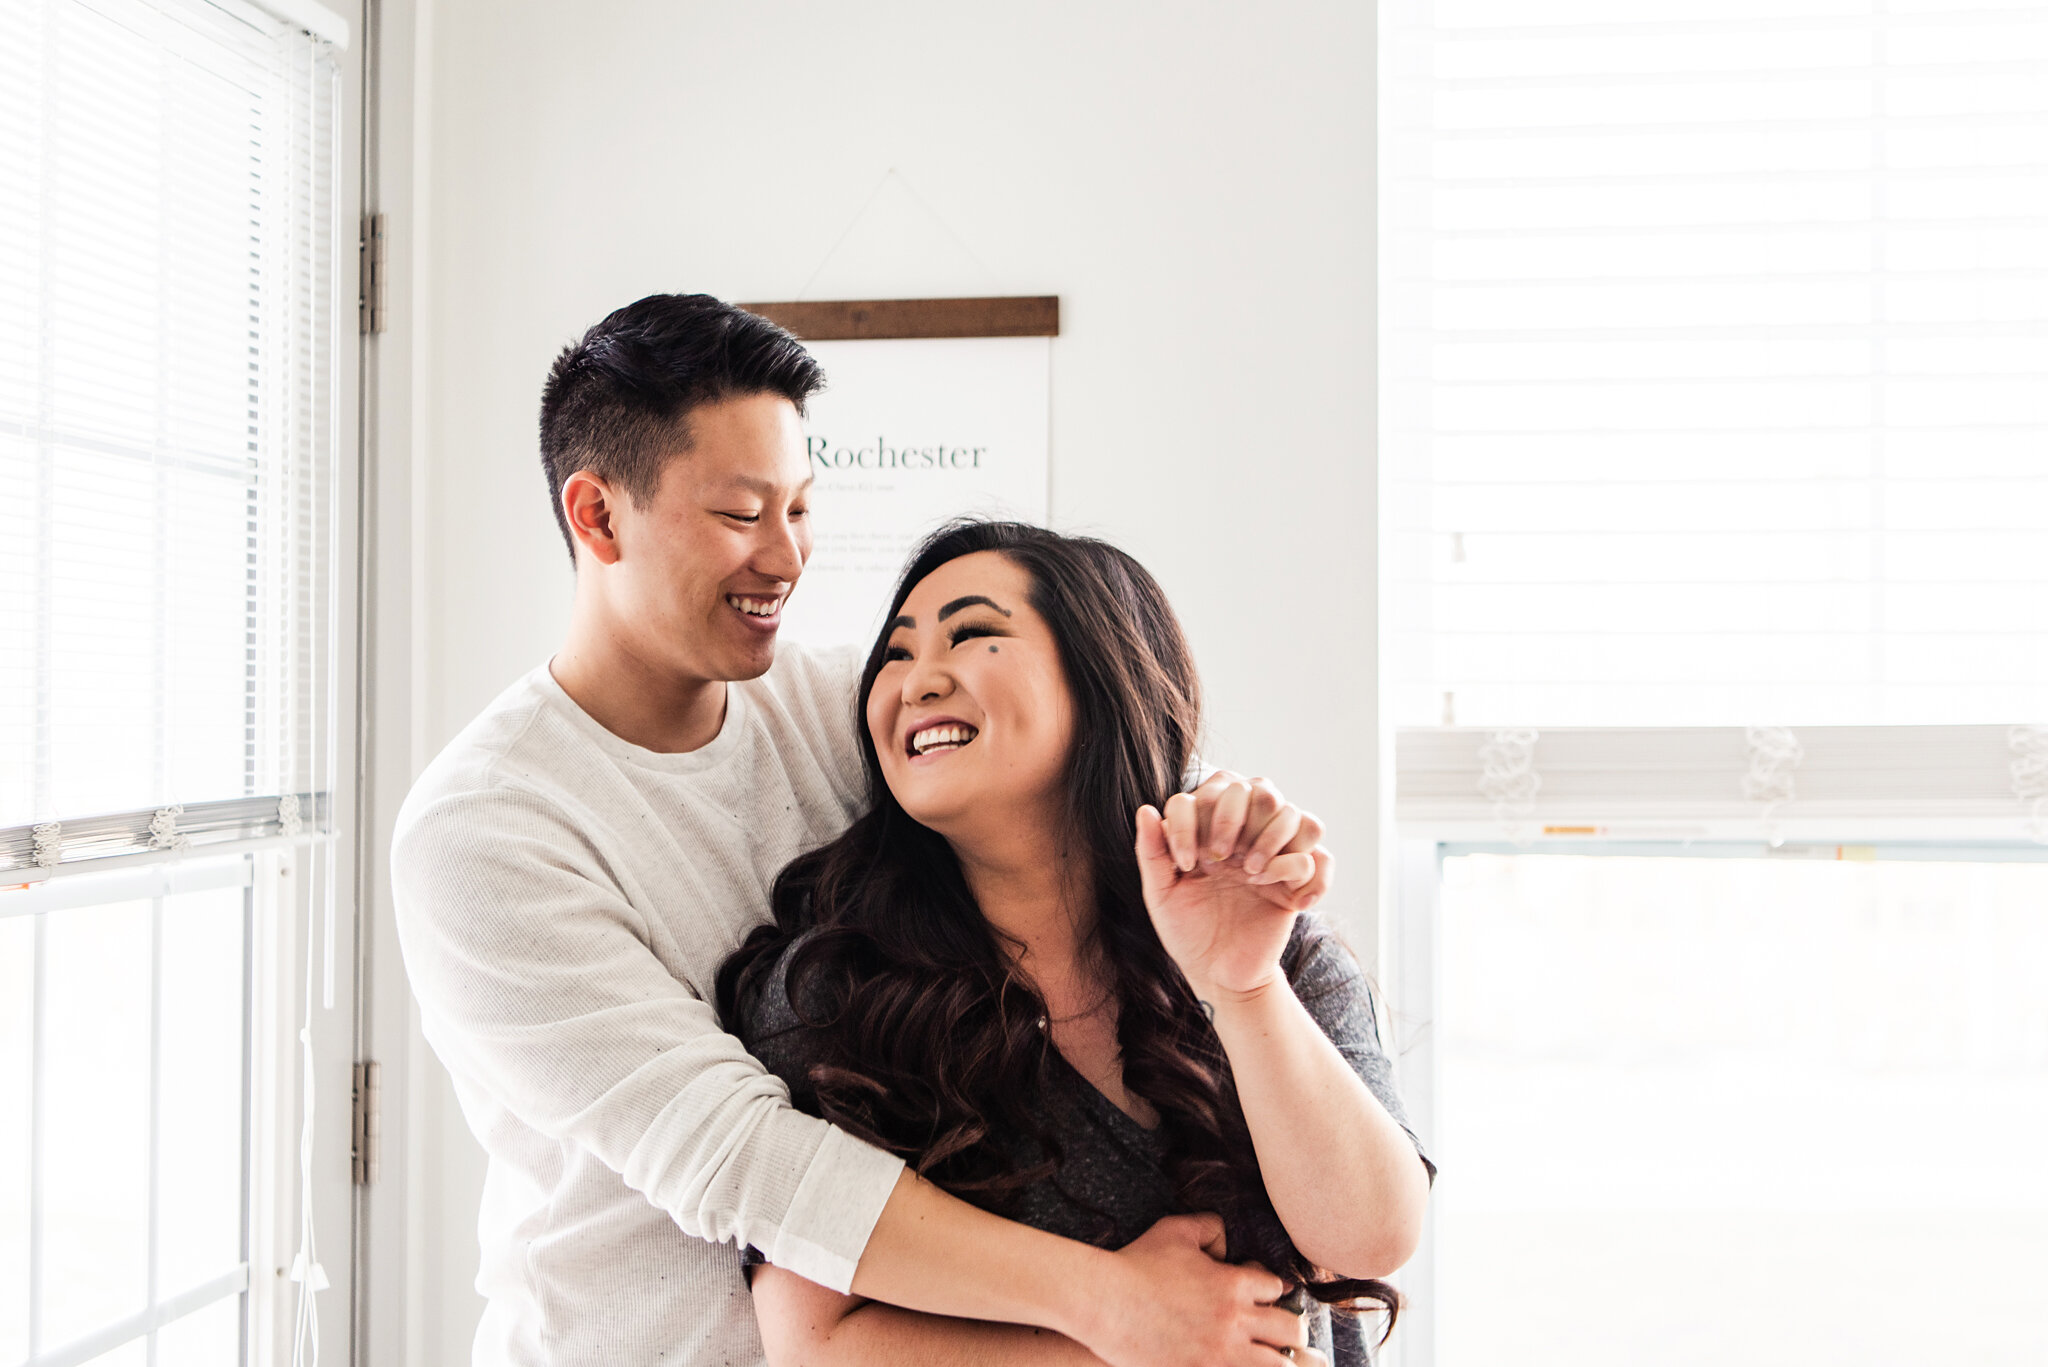 In_Home_Rochester_Couples_Session_JILL_STUDIO_Rochester_NY_Photographer_4161.jpg